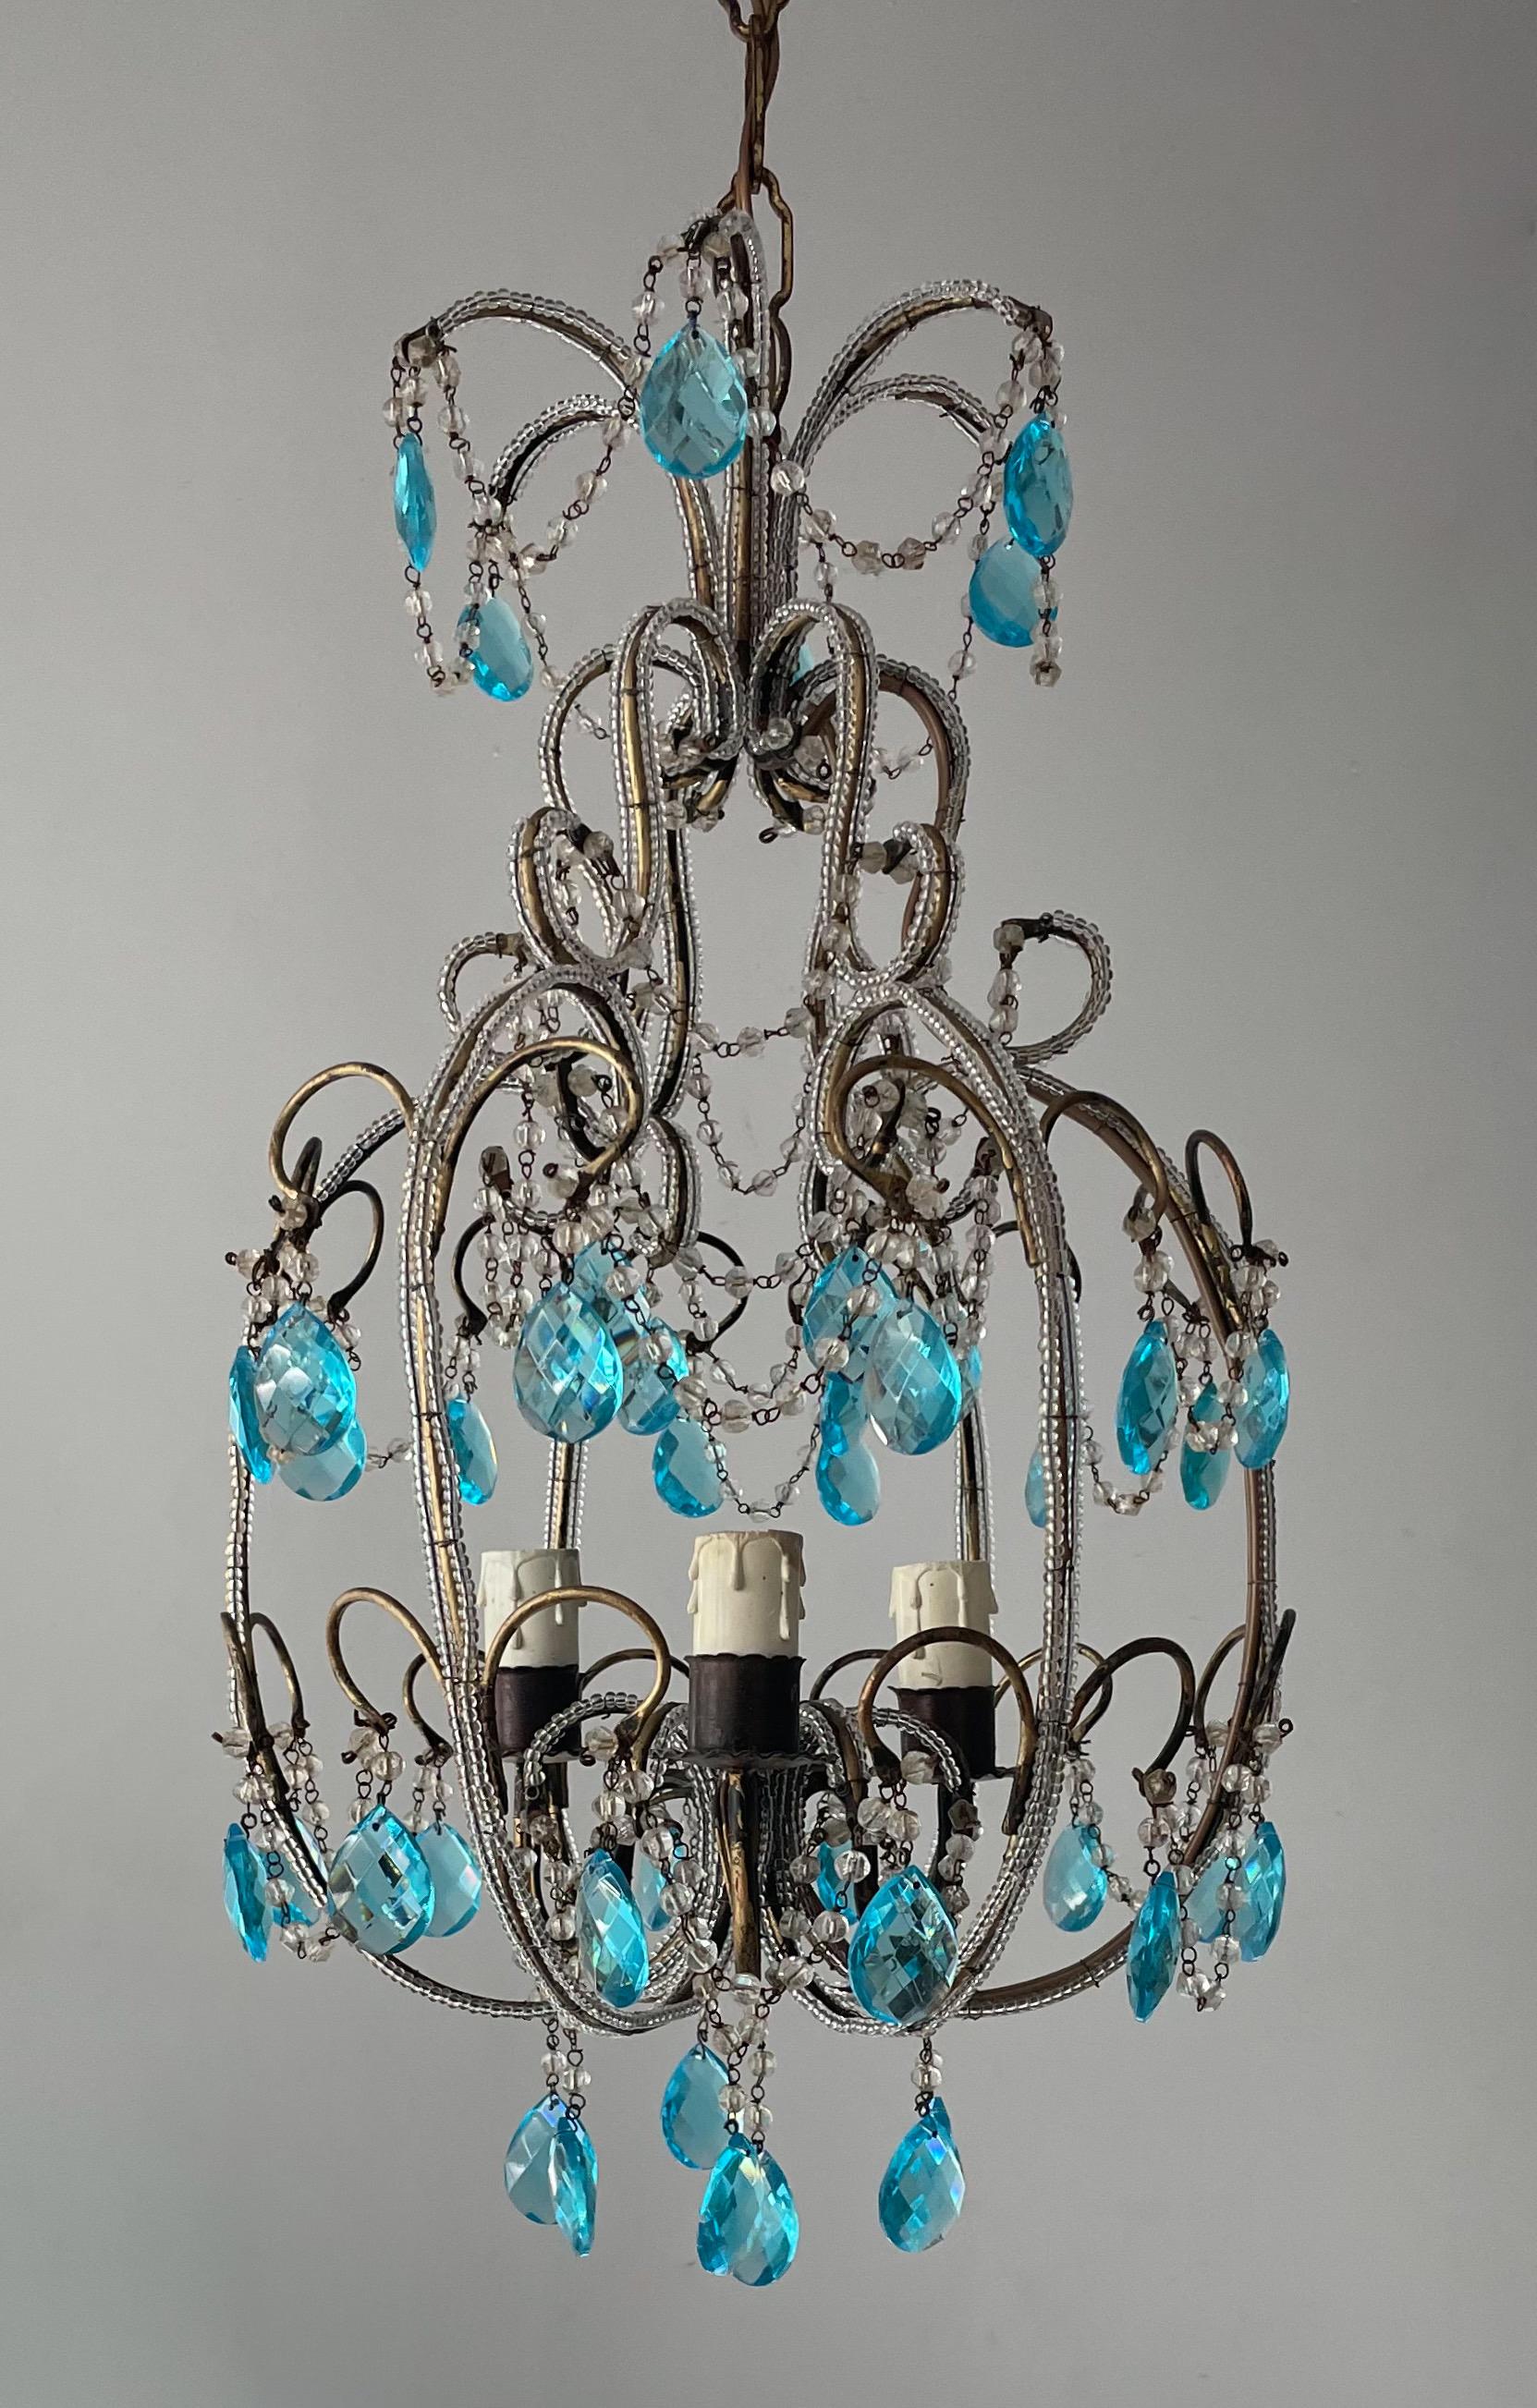 Delicate, vintage Italian gilt-iron and crystal beaded chandelier.

The chandelier features an organic-shaped gilded iron frame outlined with glass beads and faceted turquoise glass prisms. 

The chandelier is wired and in working condition, it